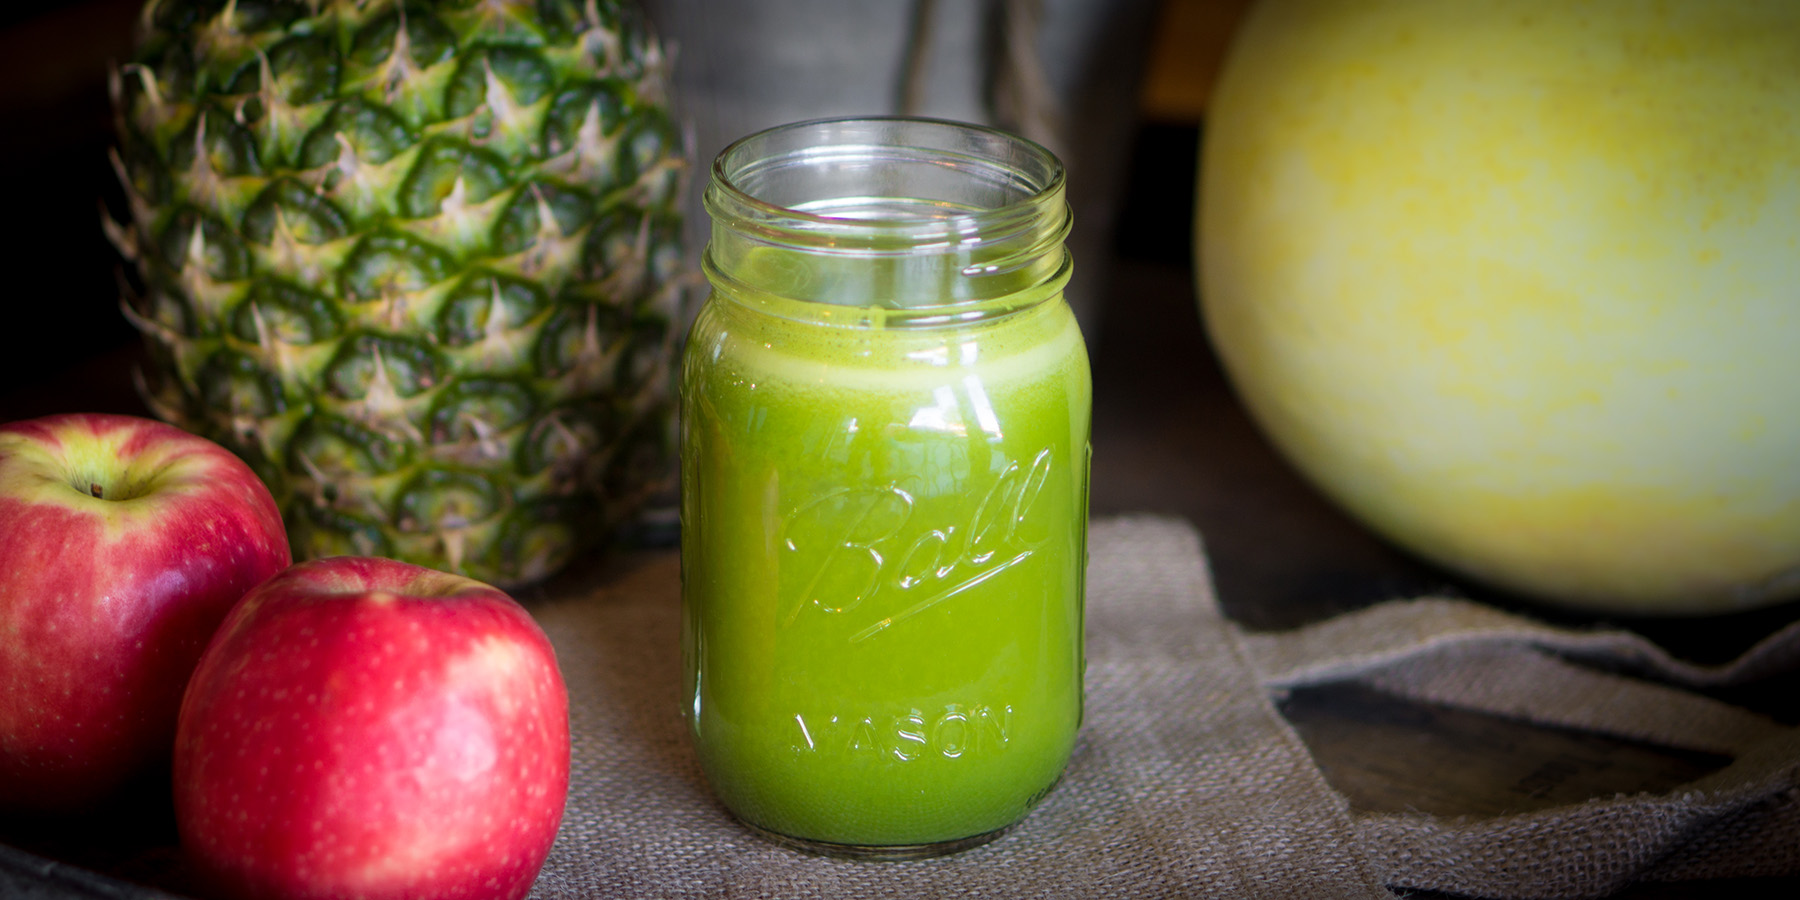 Try our Green Street juice!